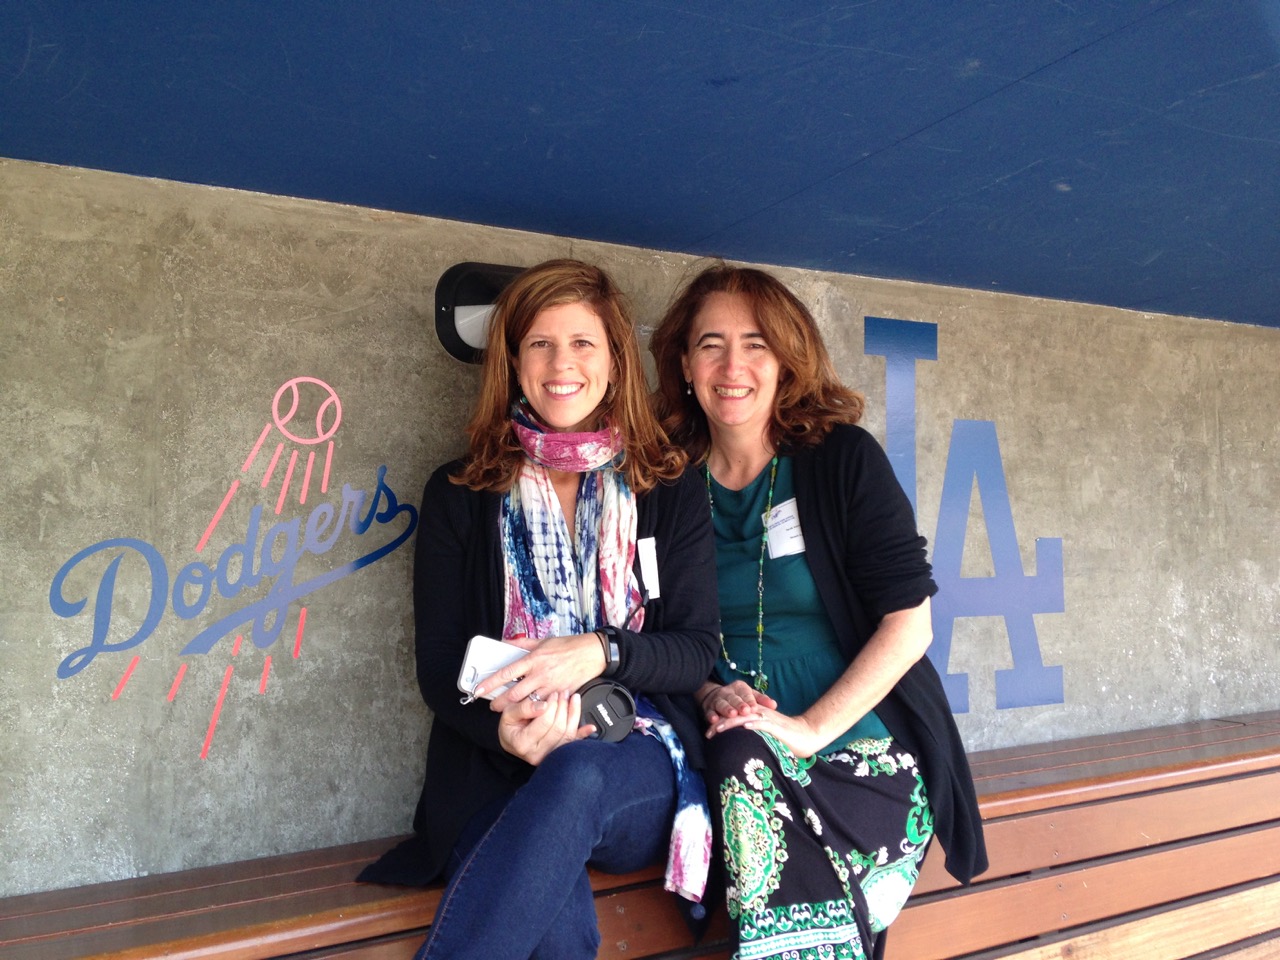 Yvonne Condes and Sarah Auerswald at Dodgers Stadium to learn about what's new with the Dodgers in 2016.